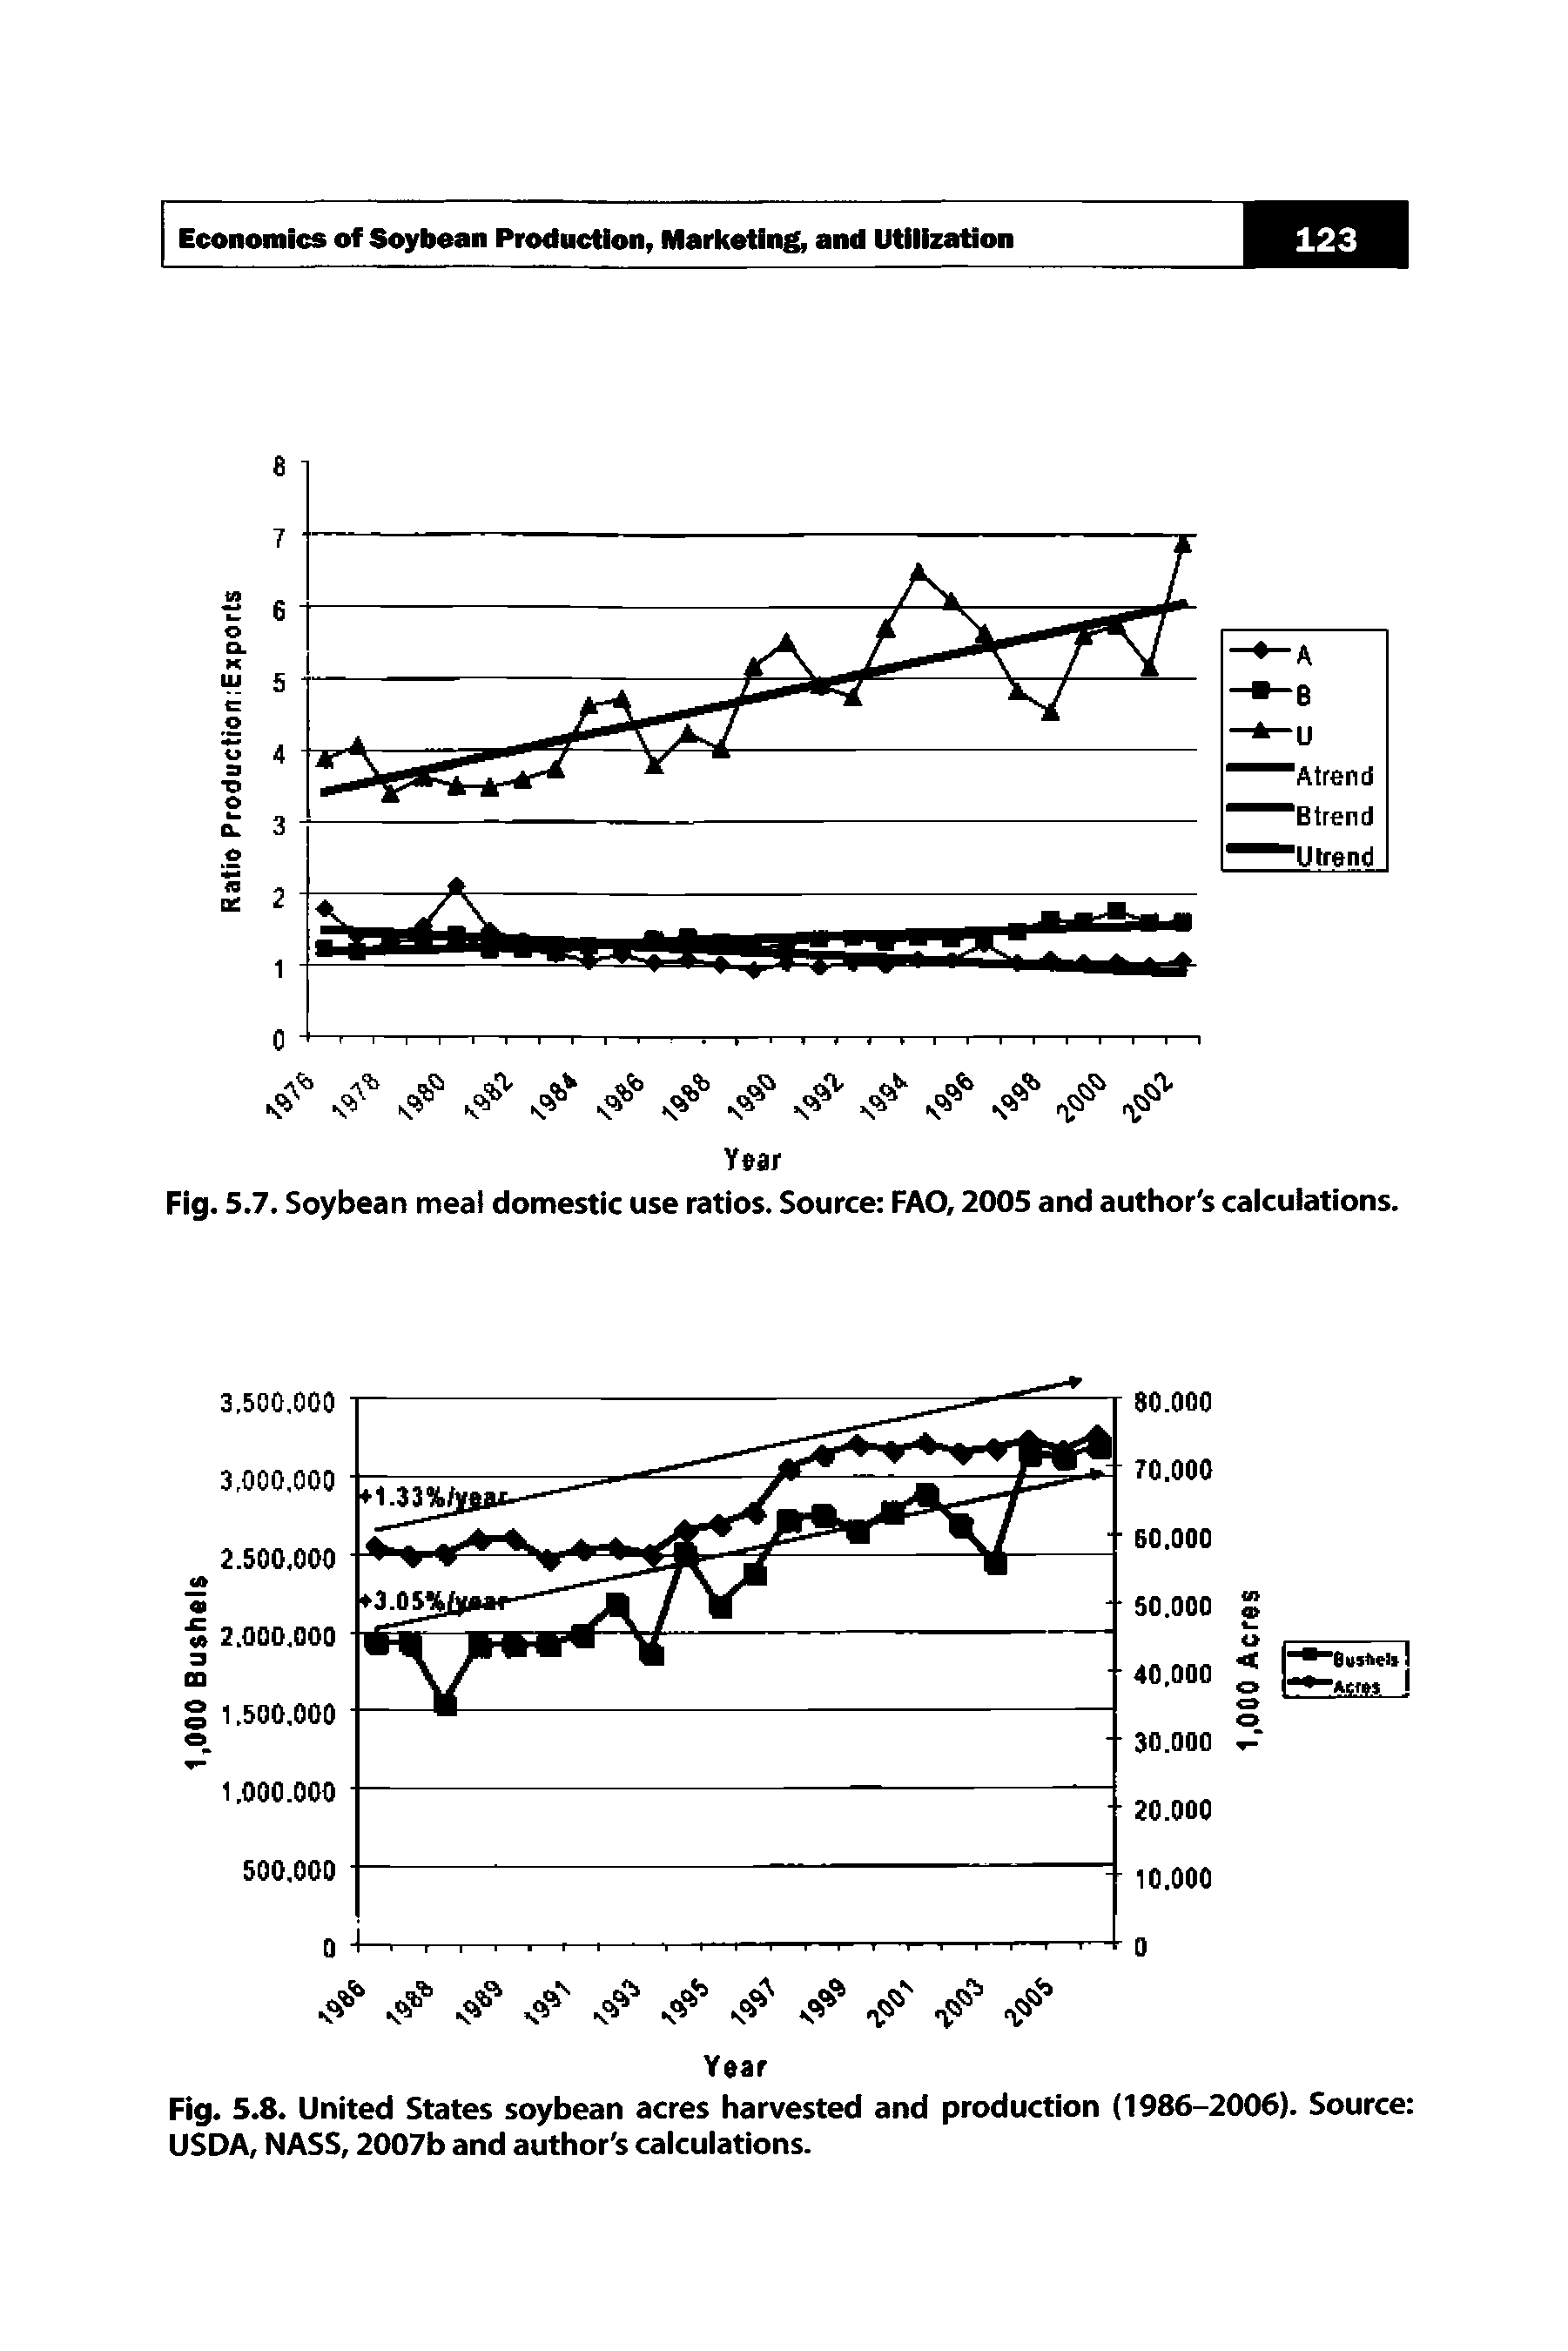 Fig. 5.7. Soybean meal domestic use ratios. Source FAO, 2005 and author s calculations.